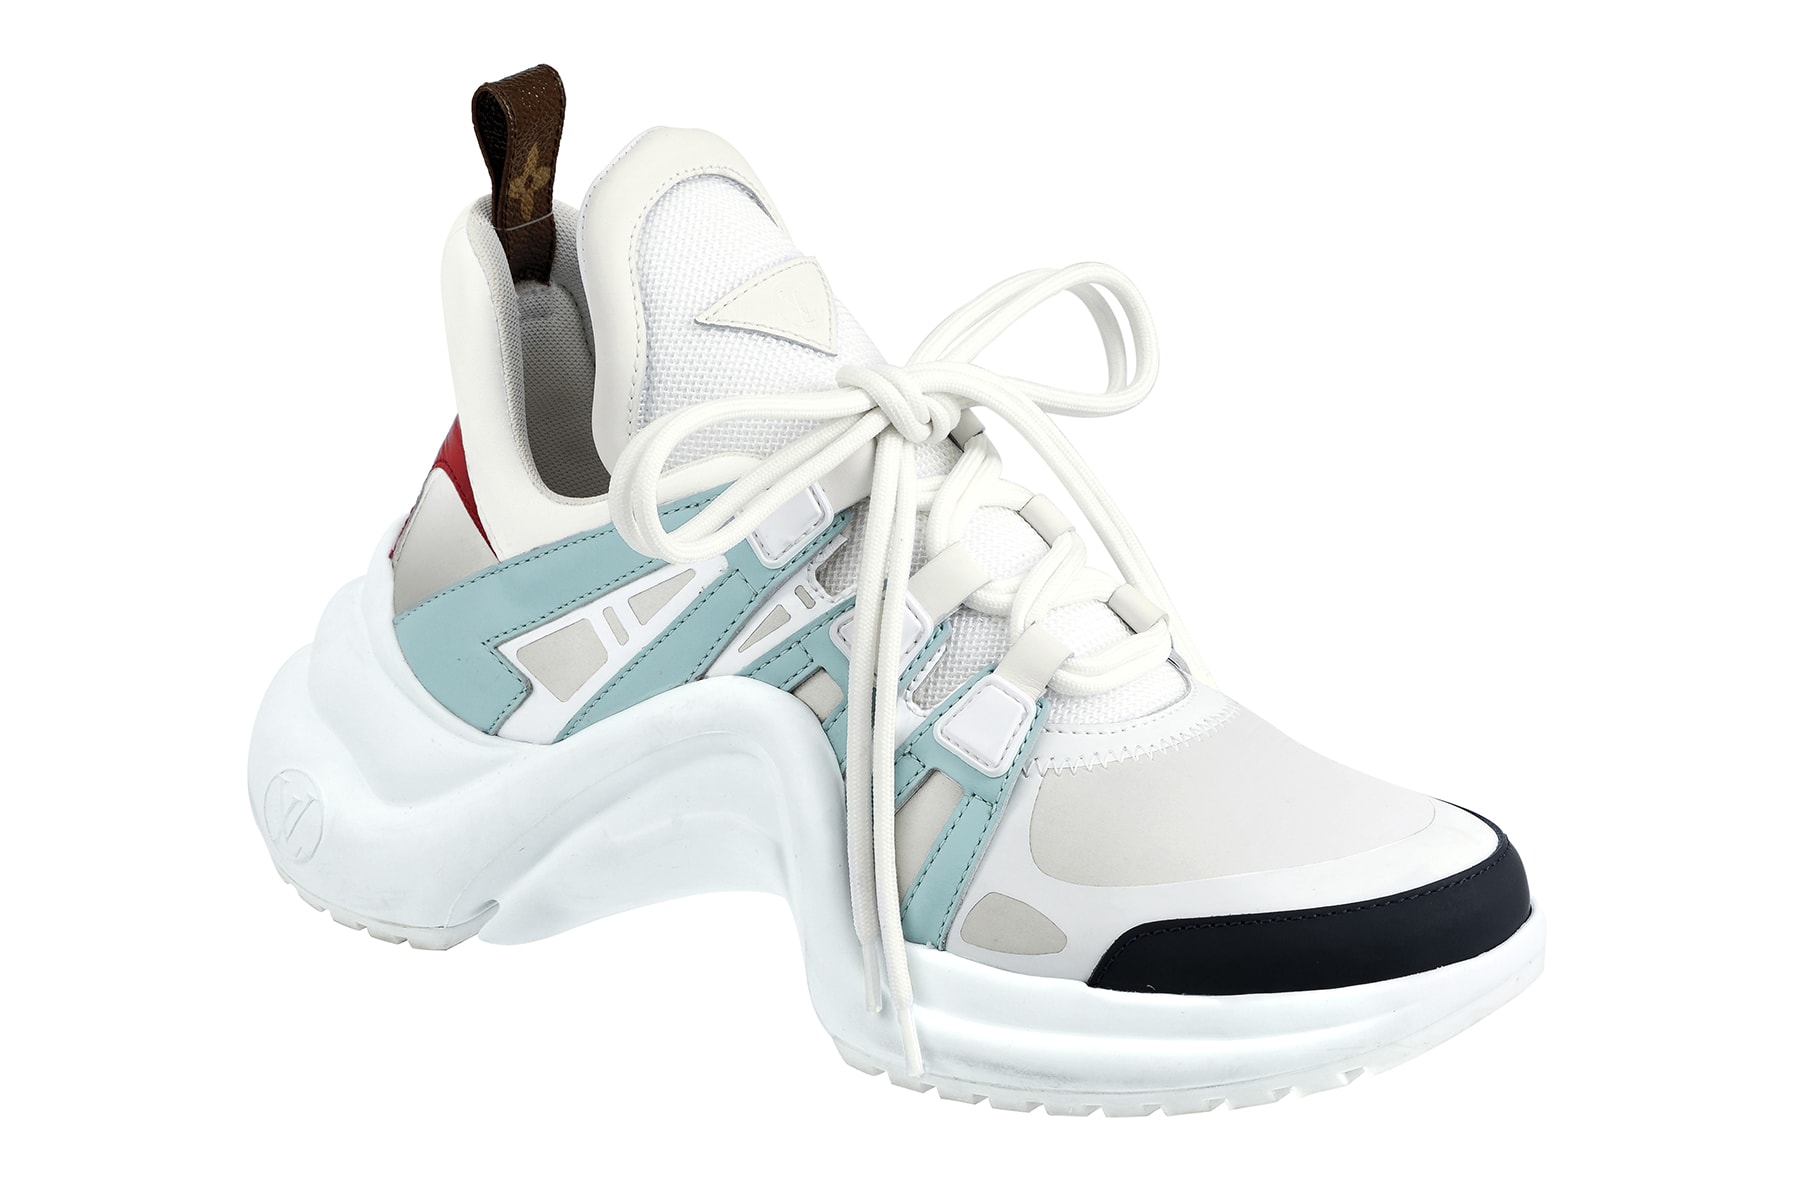 Louis Vuitton Archlight Sneaker White Blue Red Pre-Owned